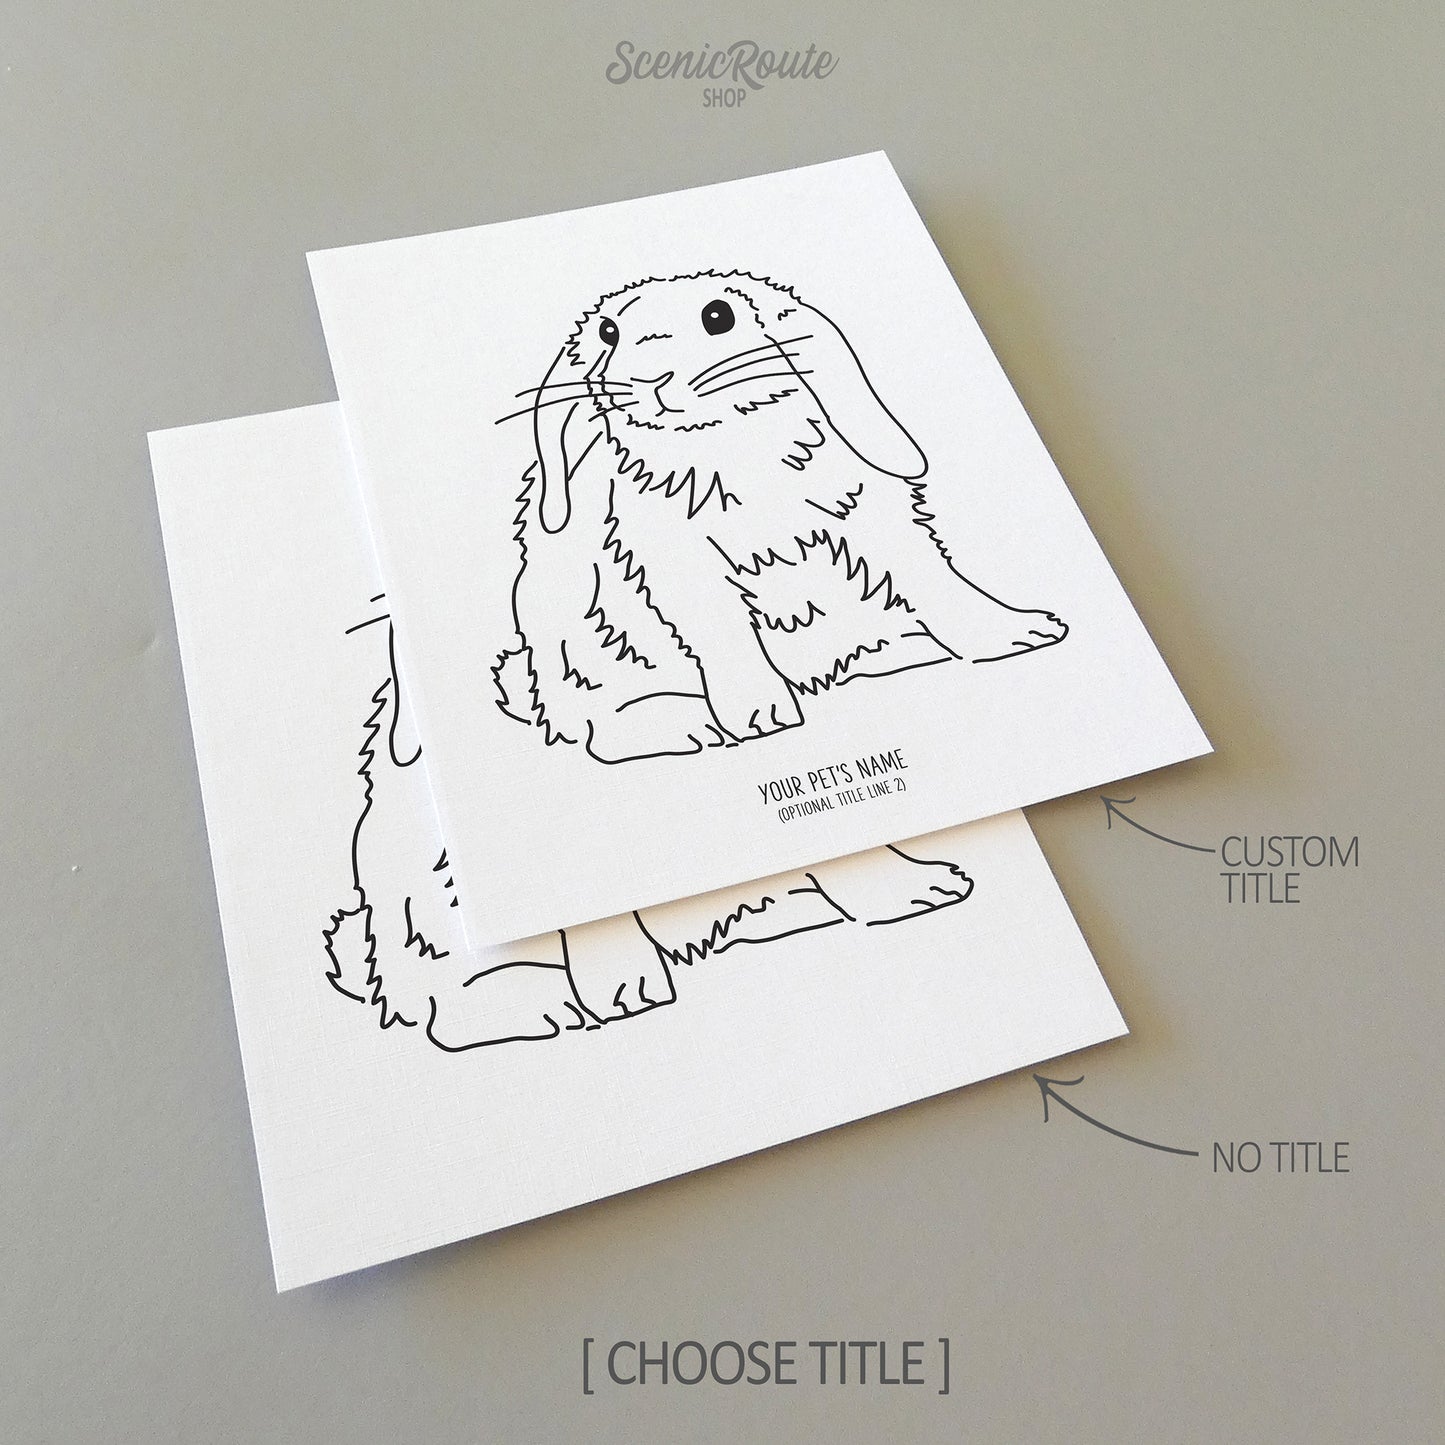 Two line art drawings of a Mini Lop Rabbit on white linen paper with a gray background.  The pieces are shown with “No Title” and “Custom Title” options for the available art print options.